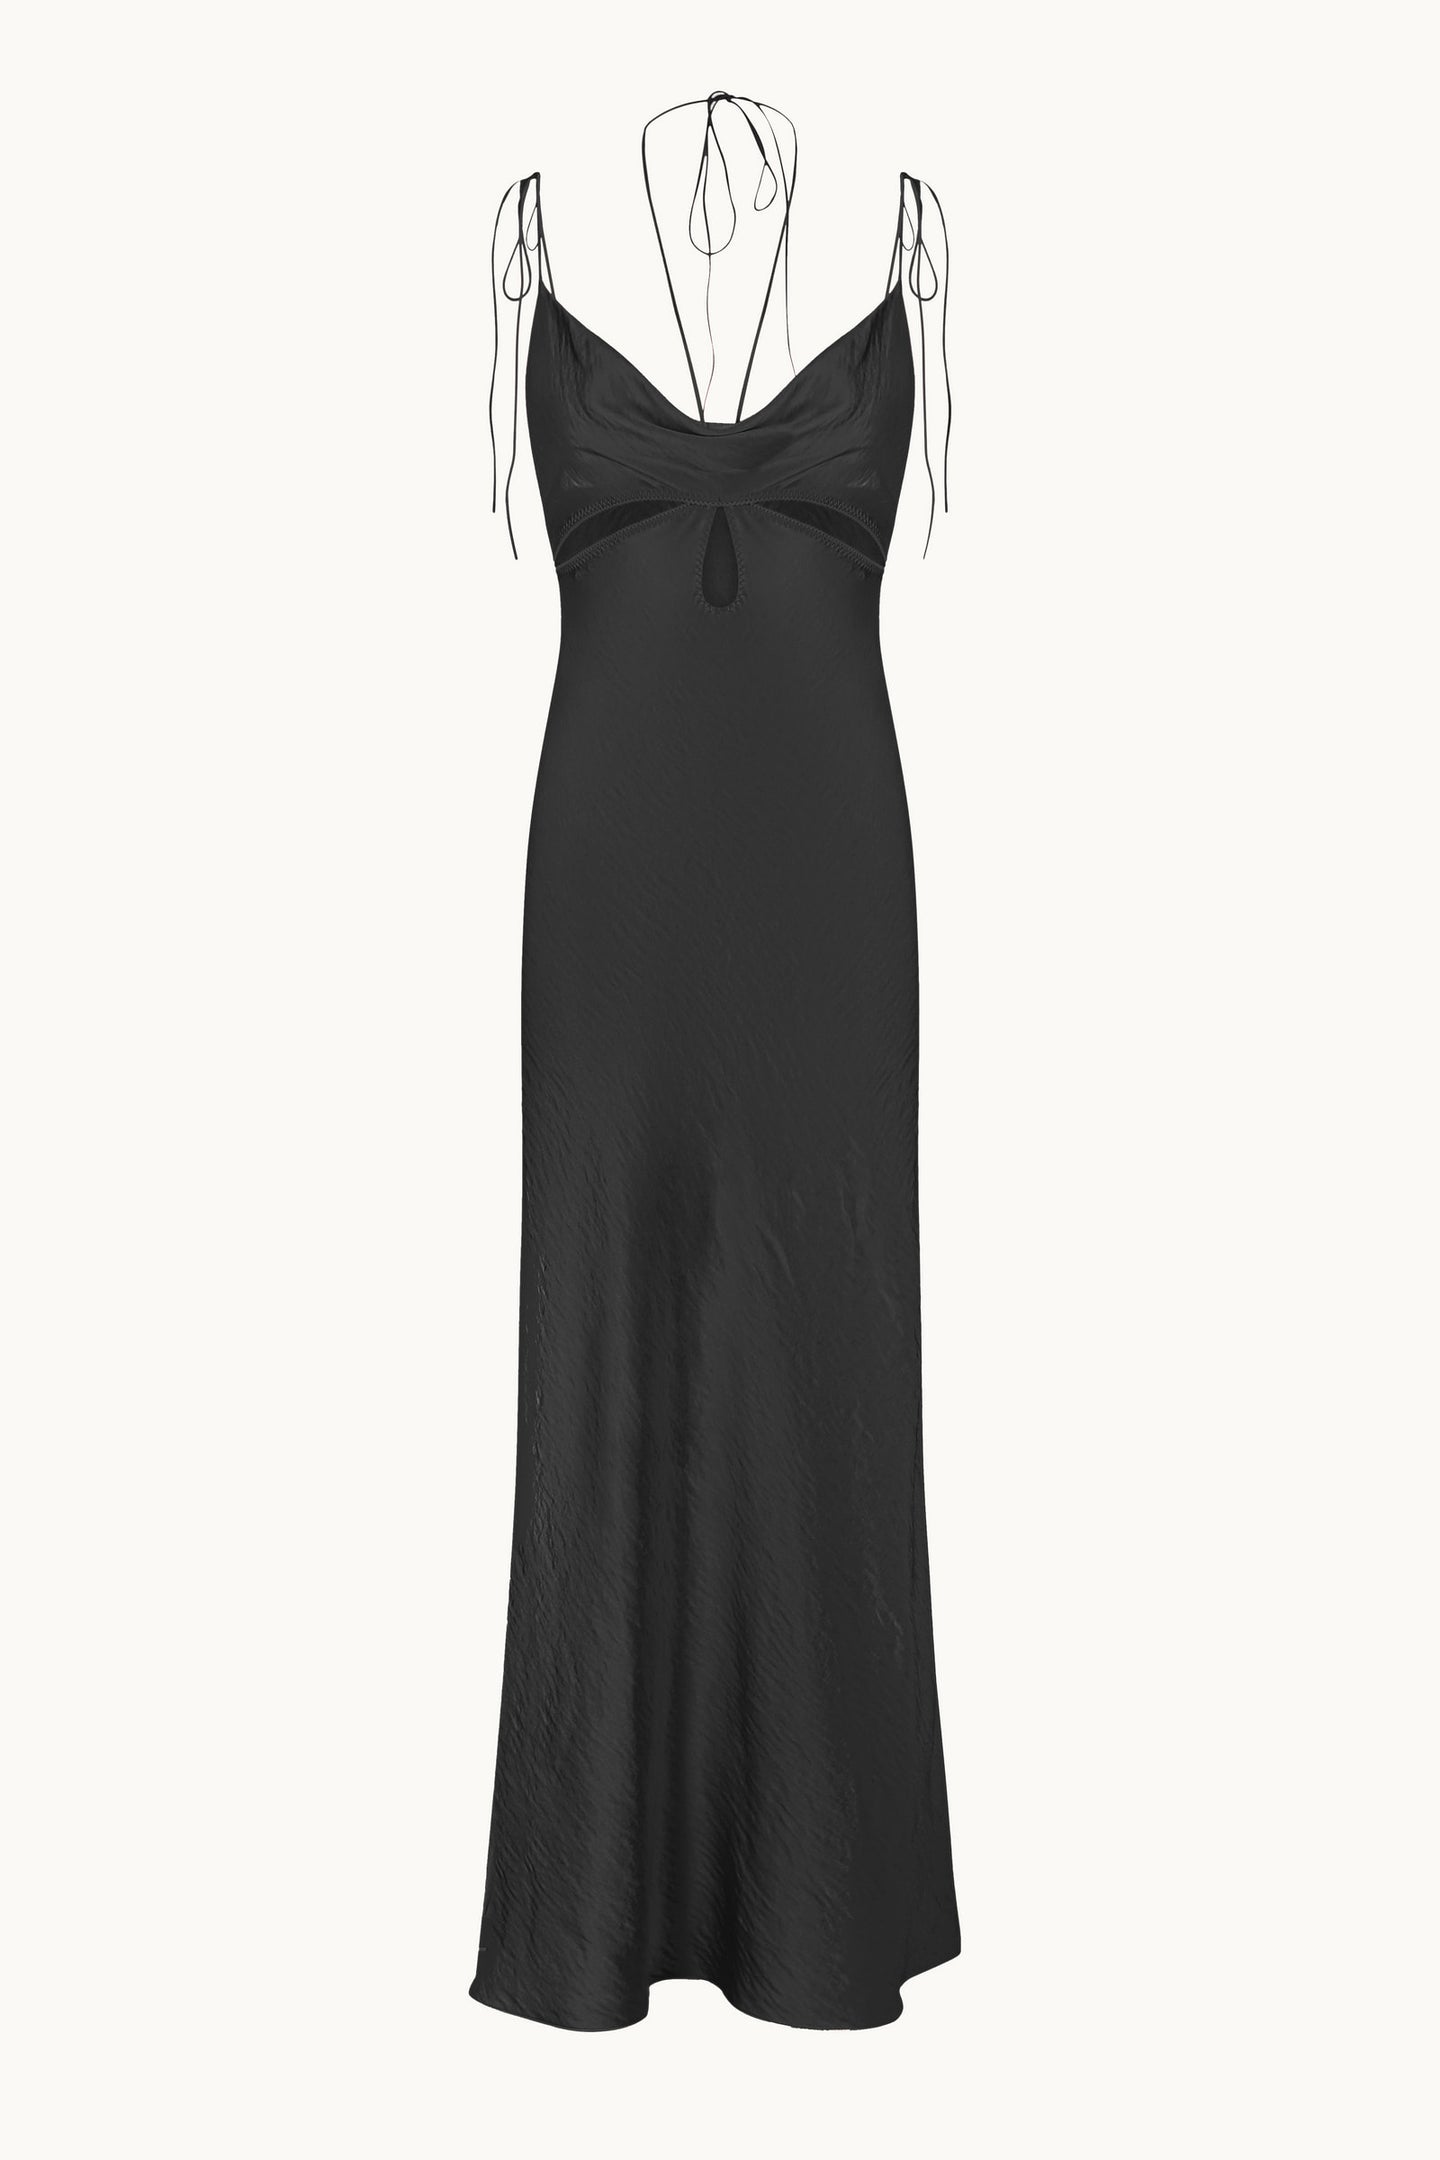 Hilary black dress front view